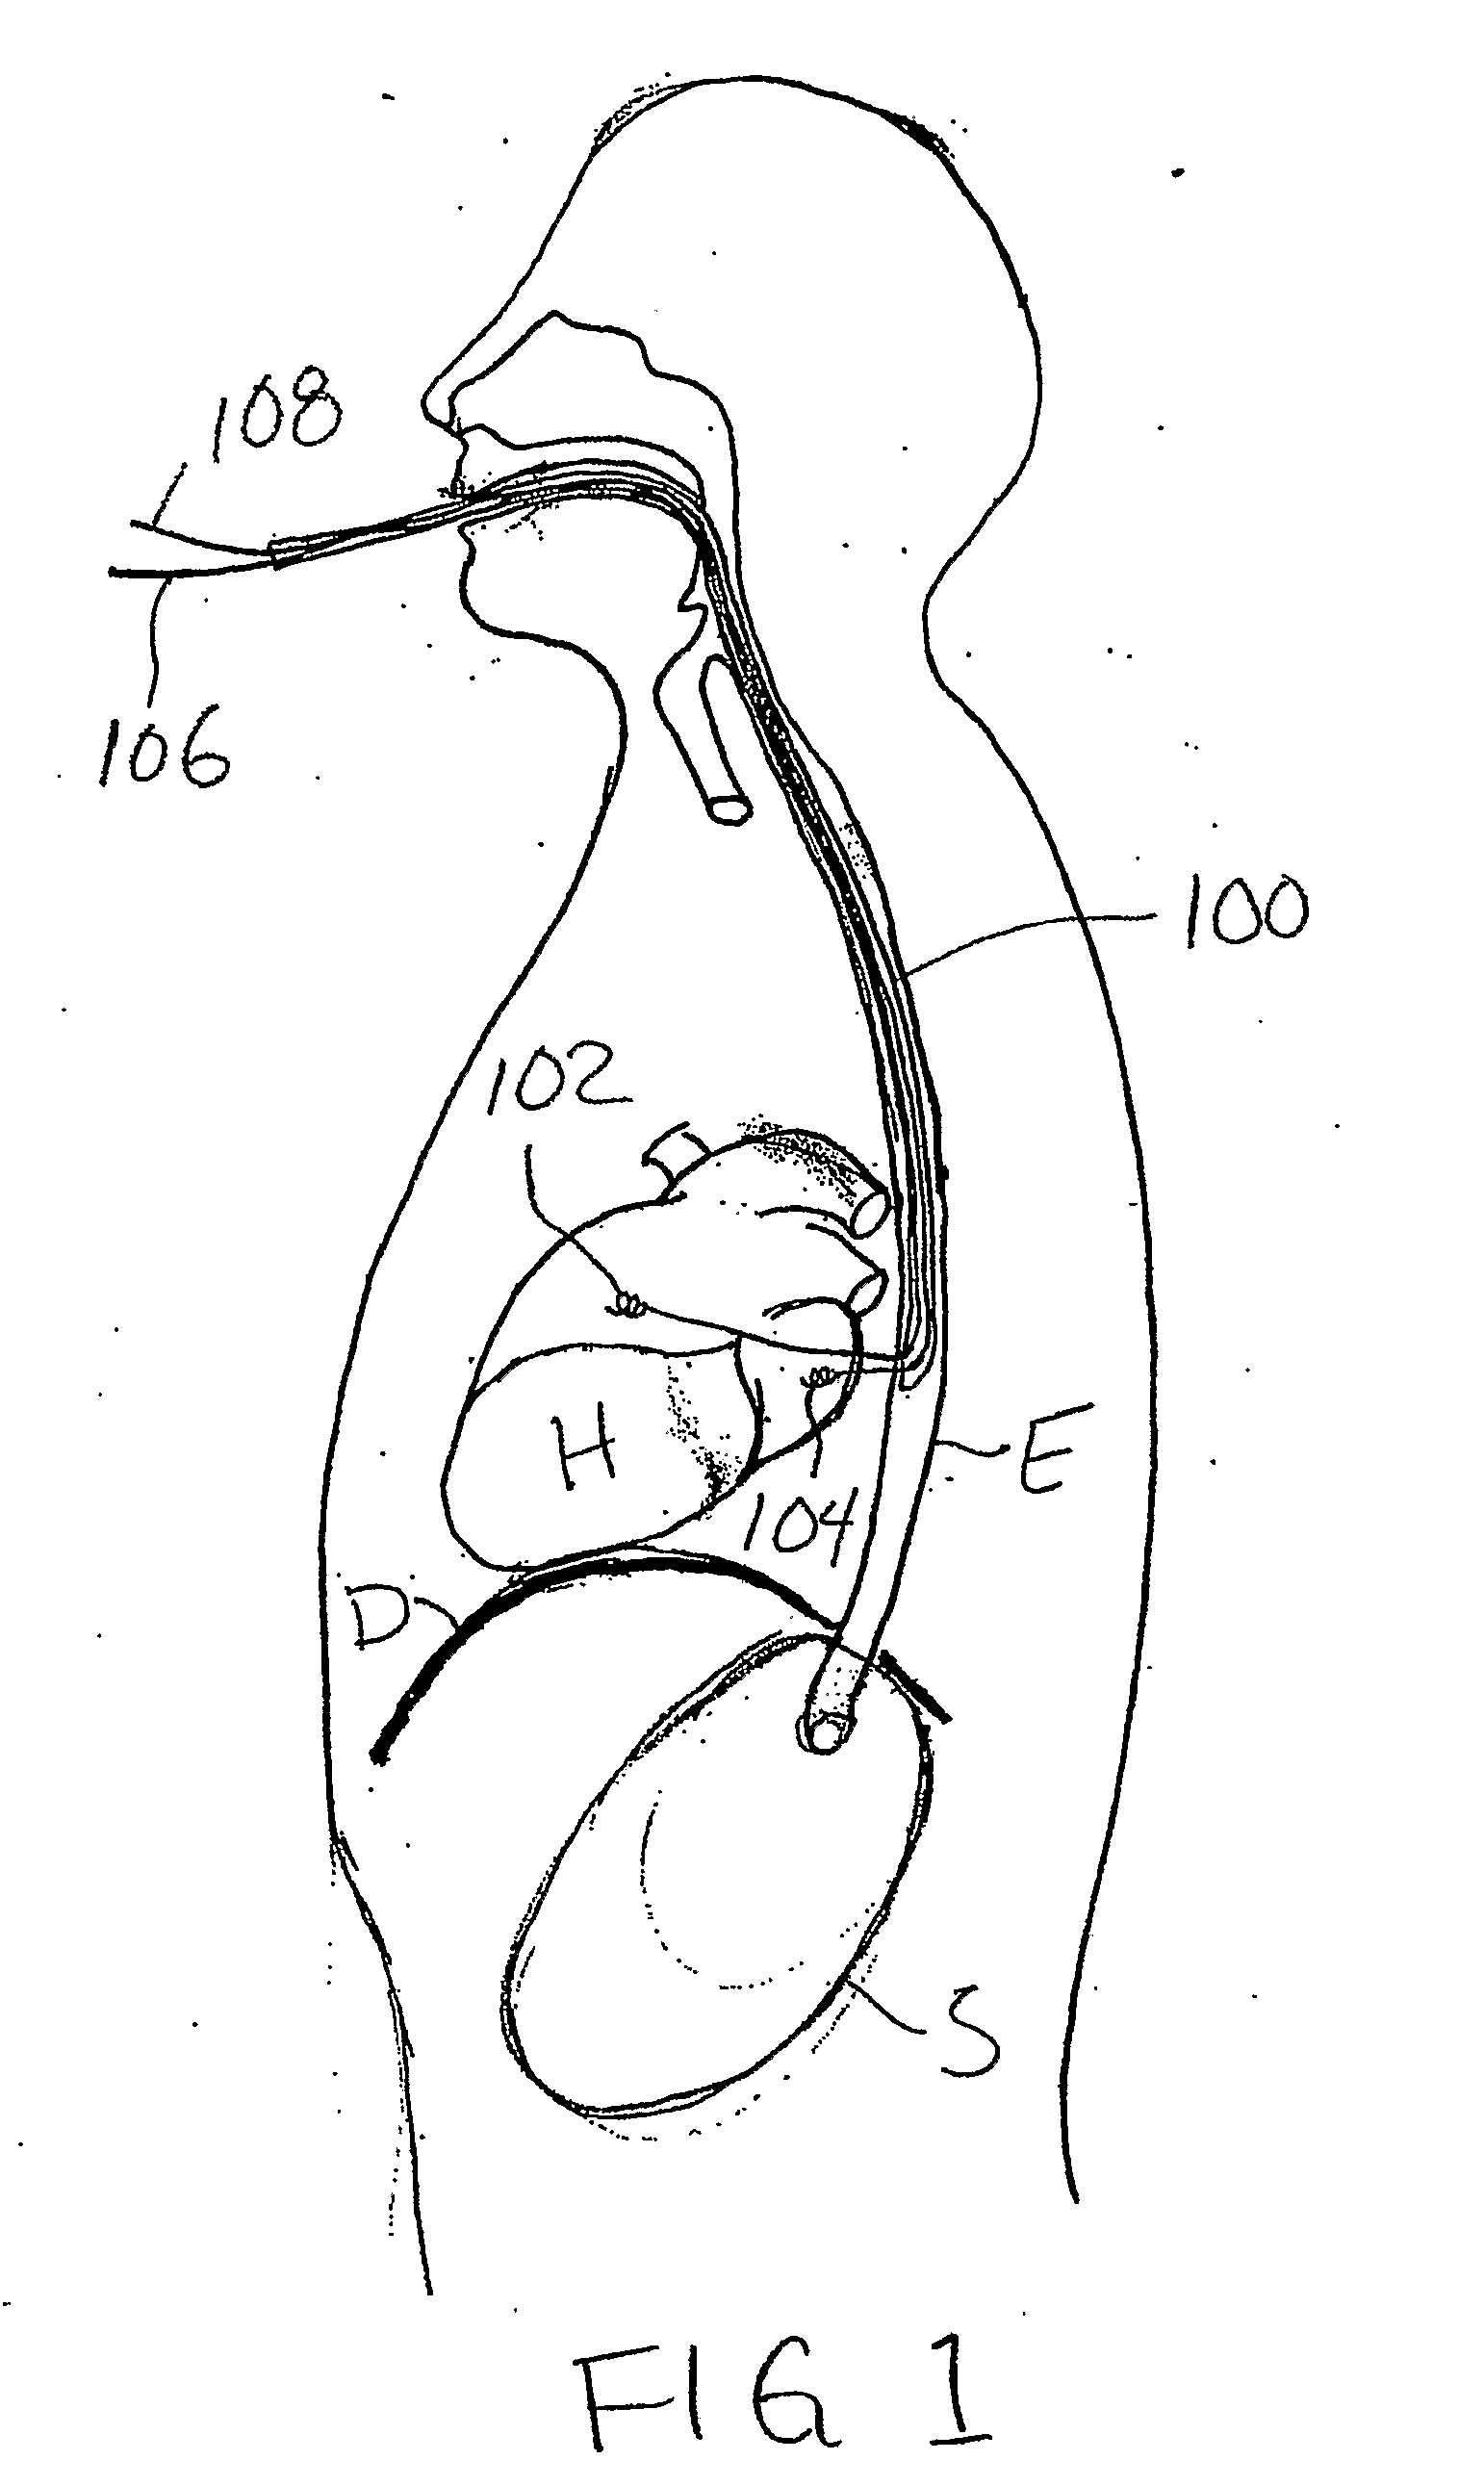 Transesophageal implantation of cardiac electrodes and delivery of cardiac therapies